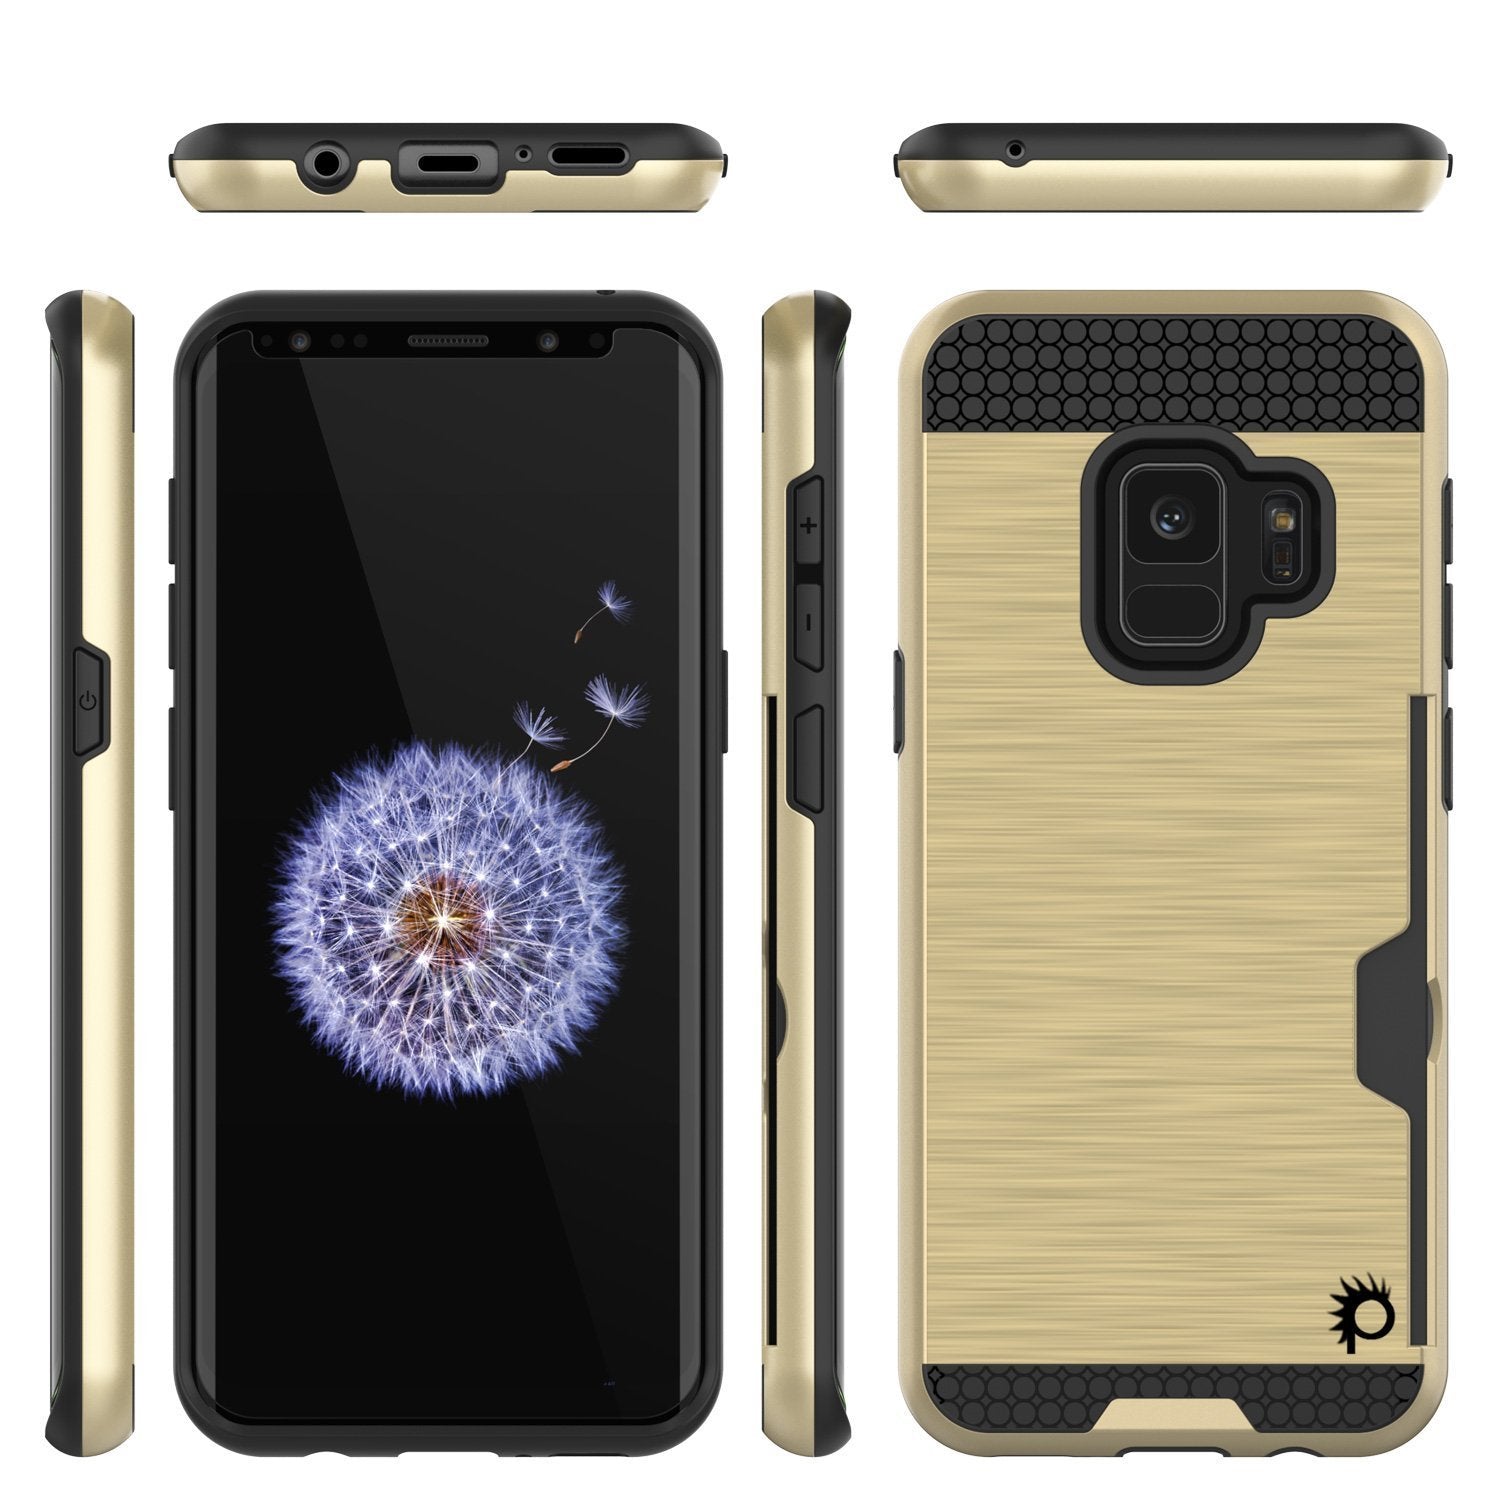 Galaxy S9 case, Punkcase SLOT Series Dual-Layer Cover [Gold]